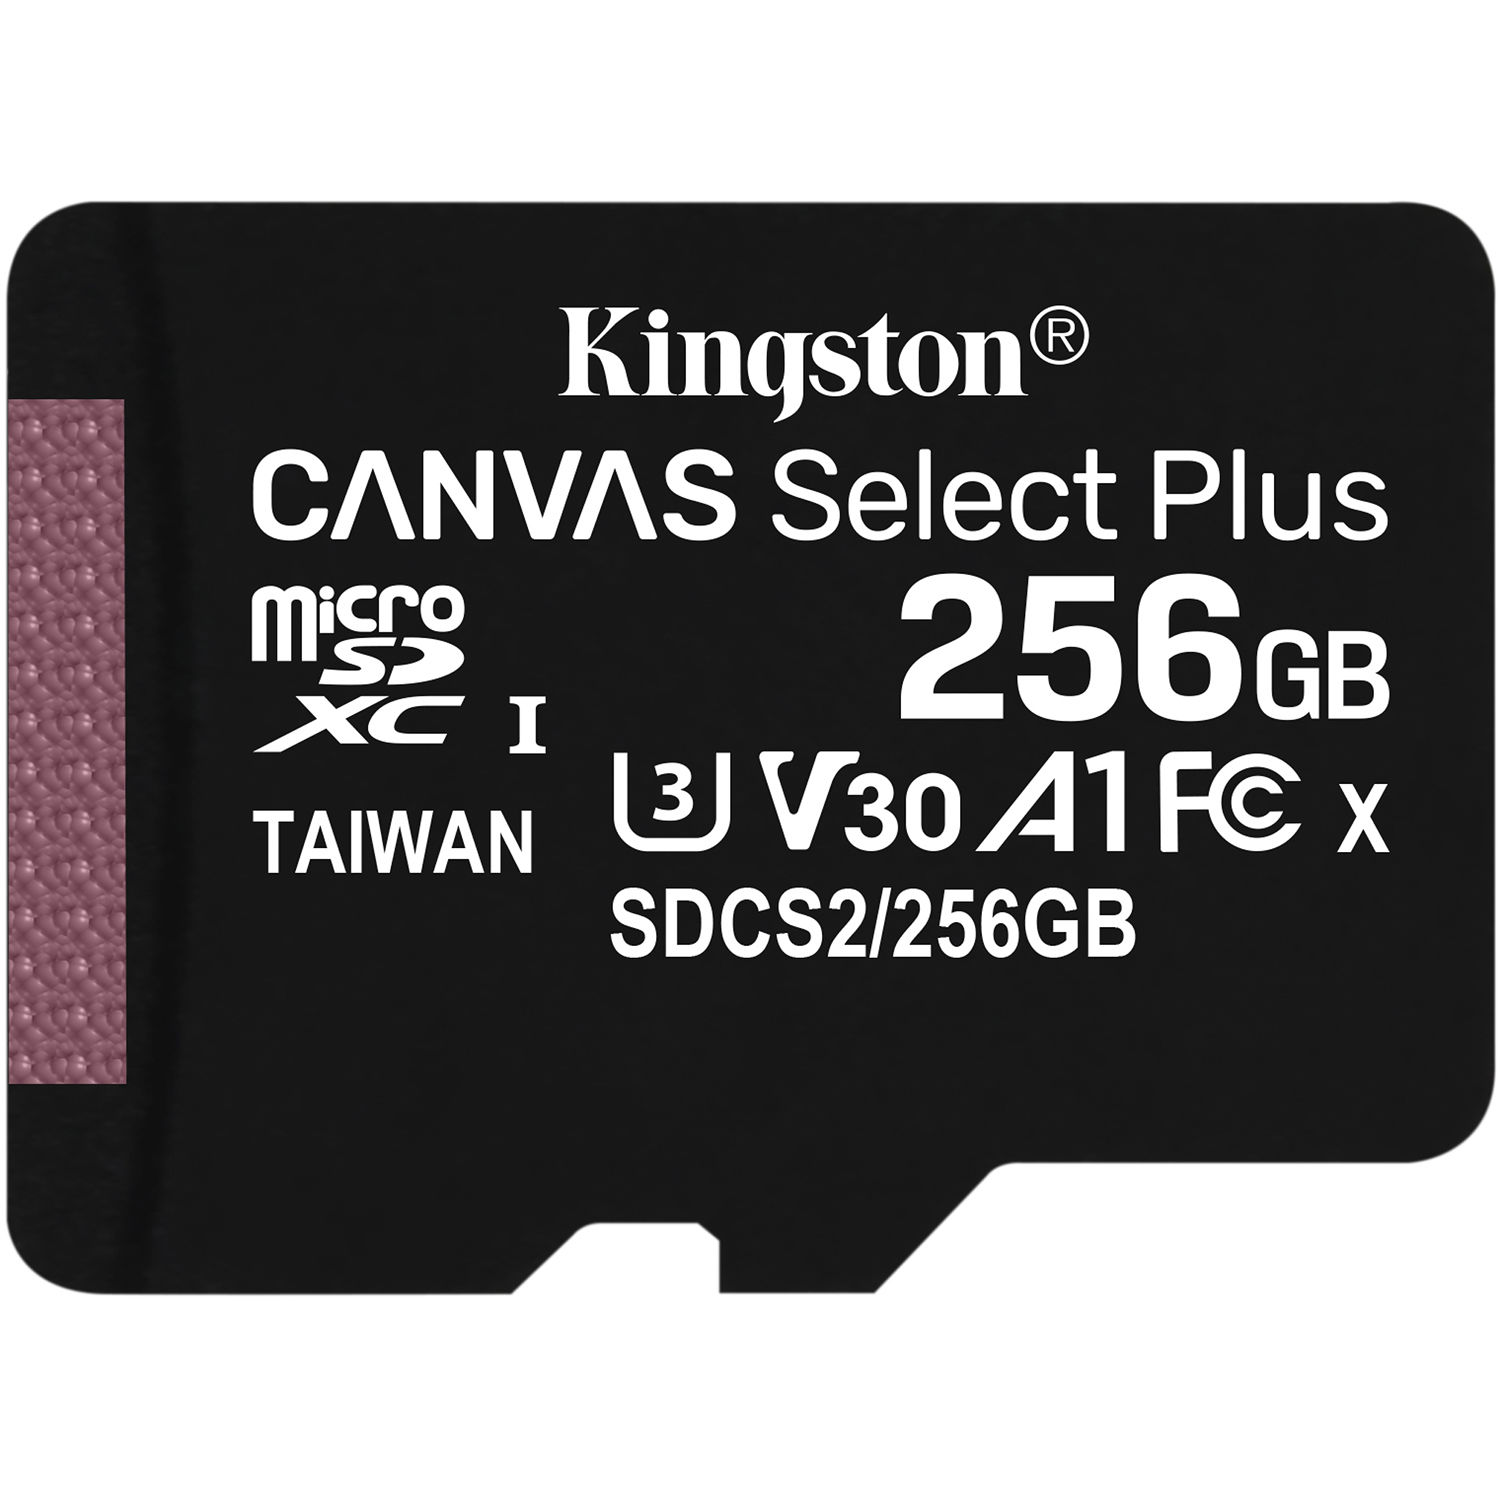 100MBs Works with Kingston Kingston 512GB HTC One MicroSDXC Canvas Select Plus Card Verified by SanFlash. 2014